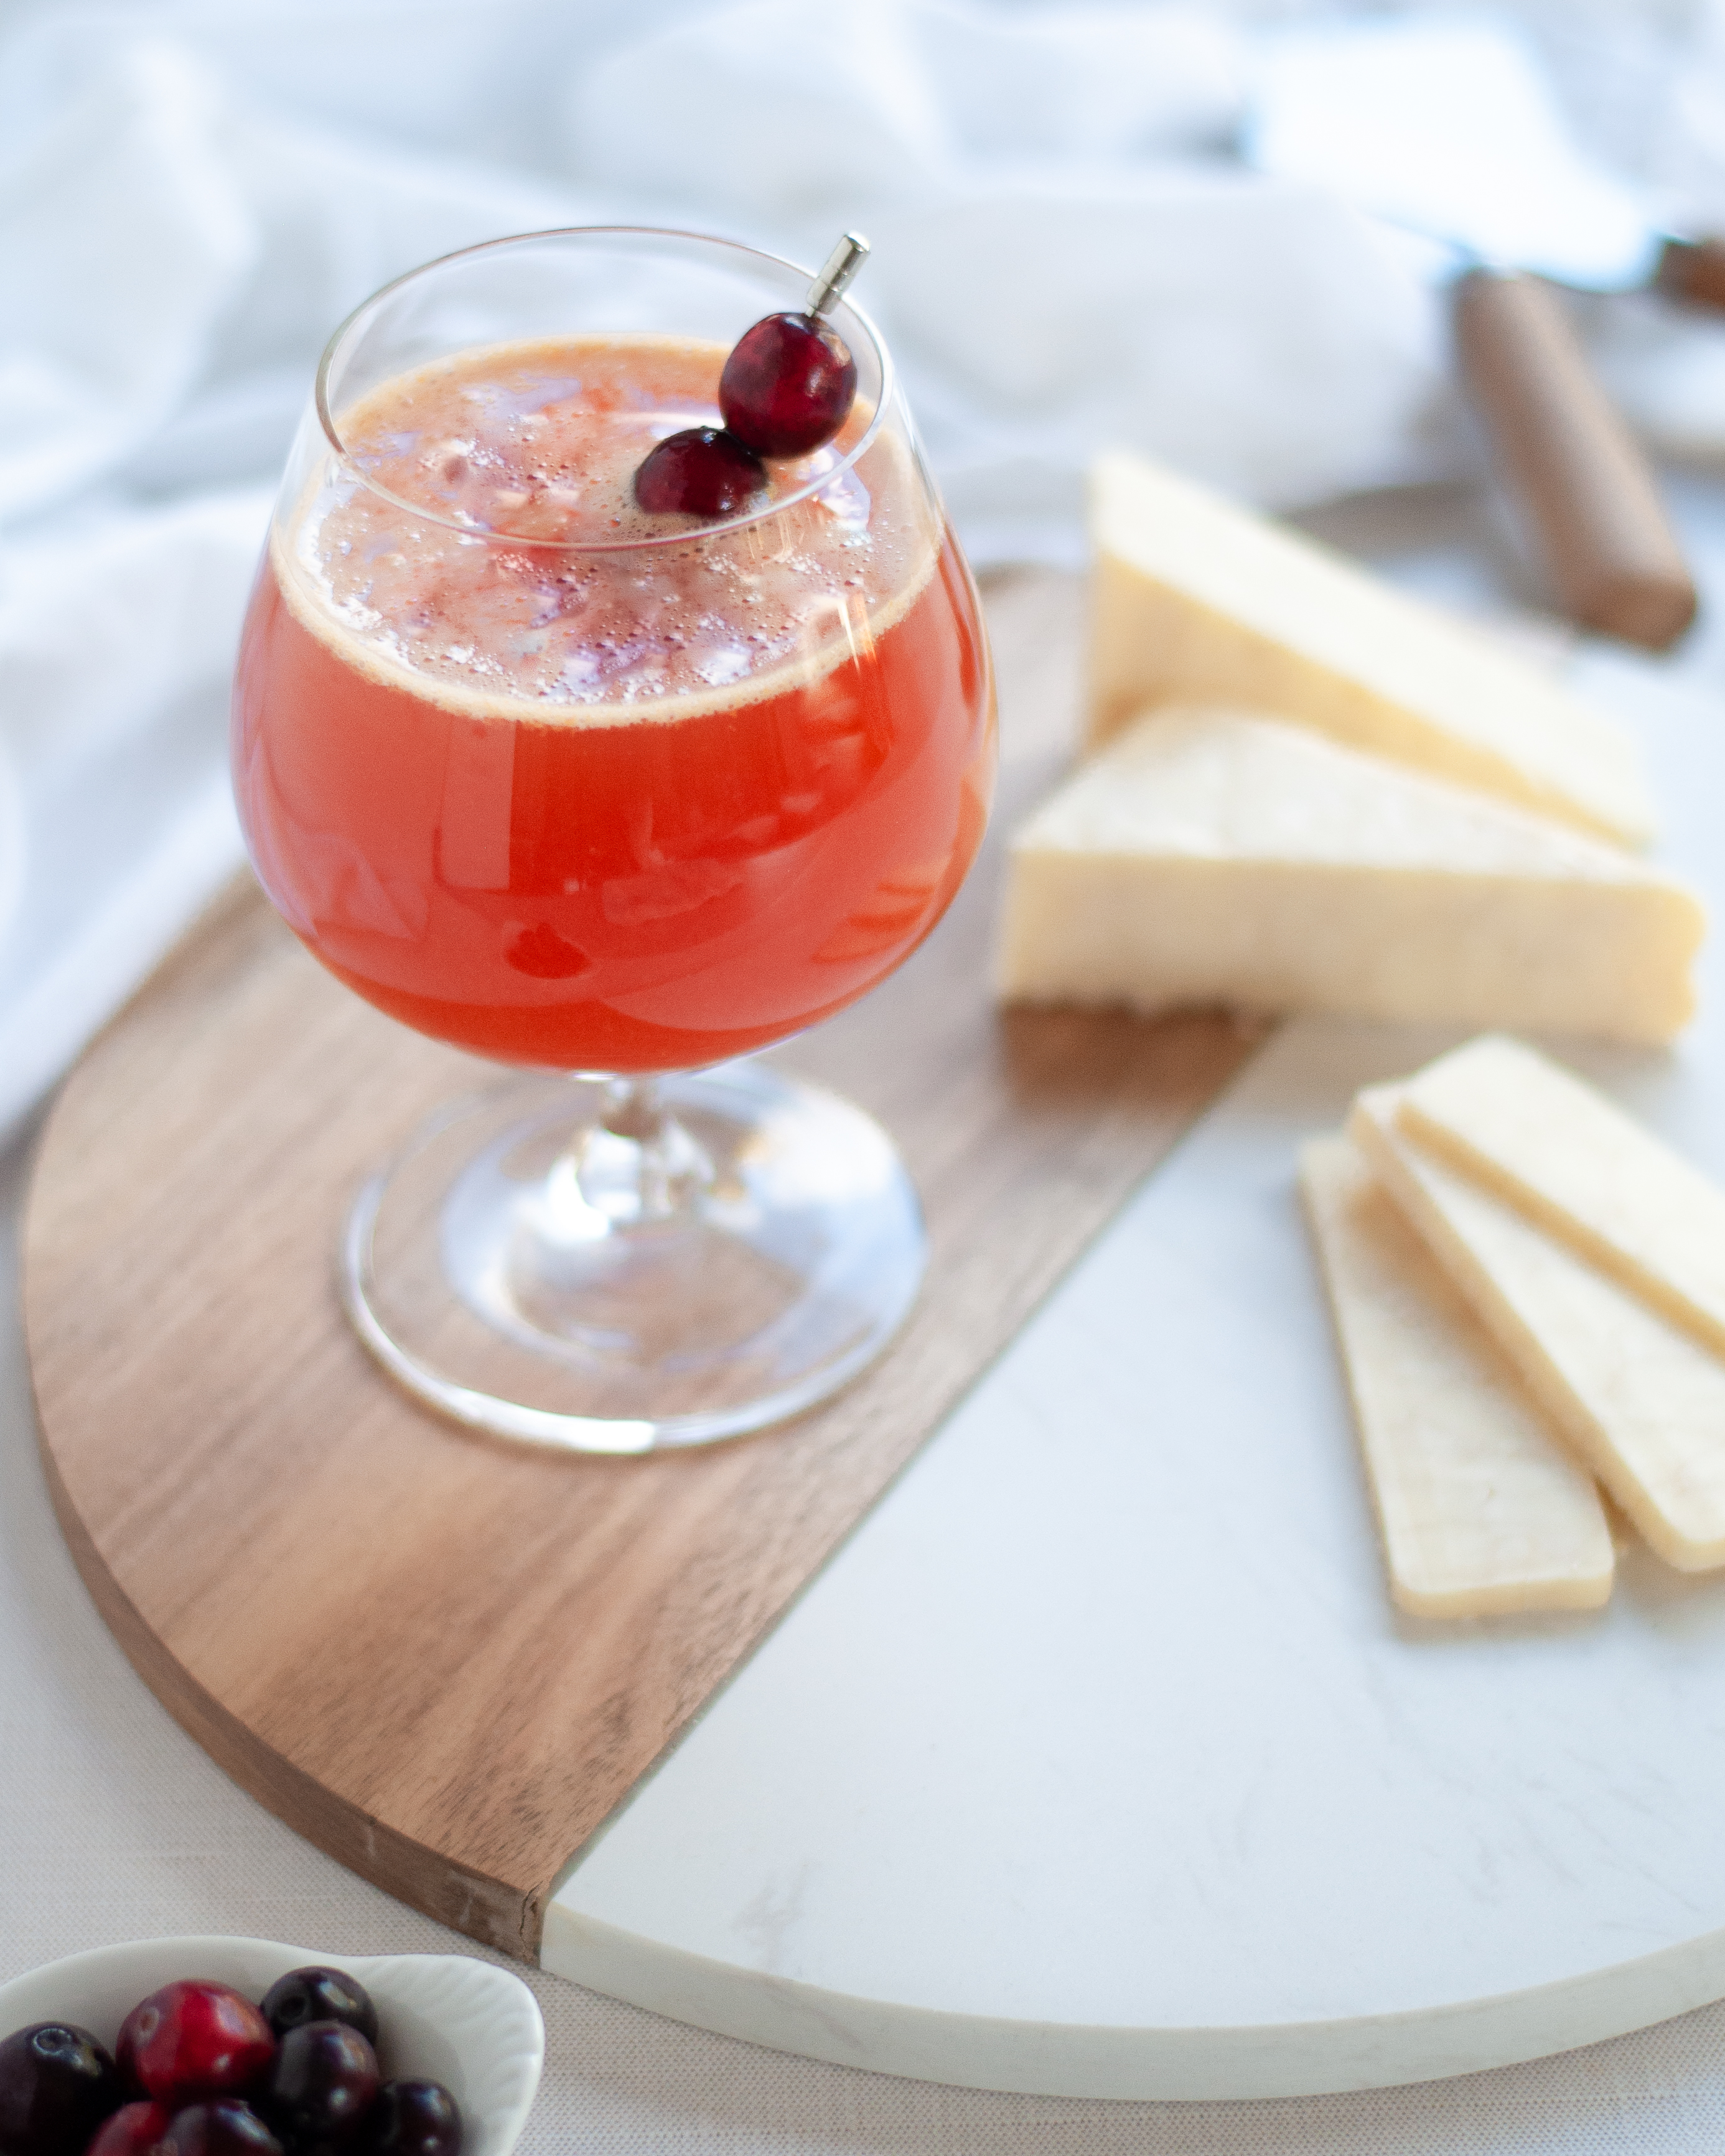 A cranberry shandy garnished with fresh cranberries is sitting on a serving board with sliced gourmet cheese.